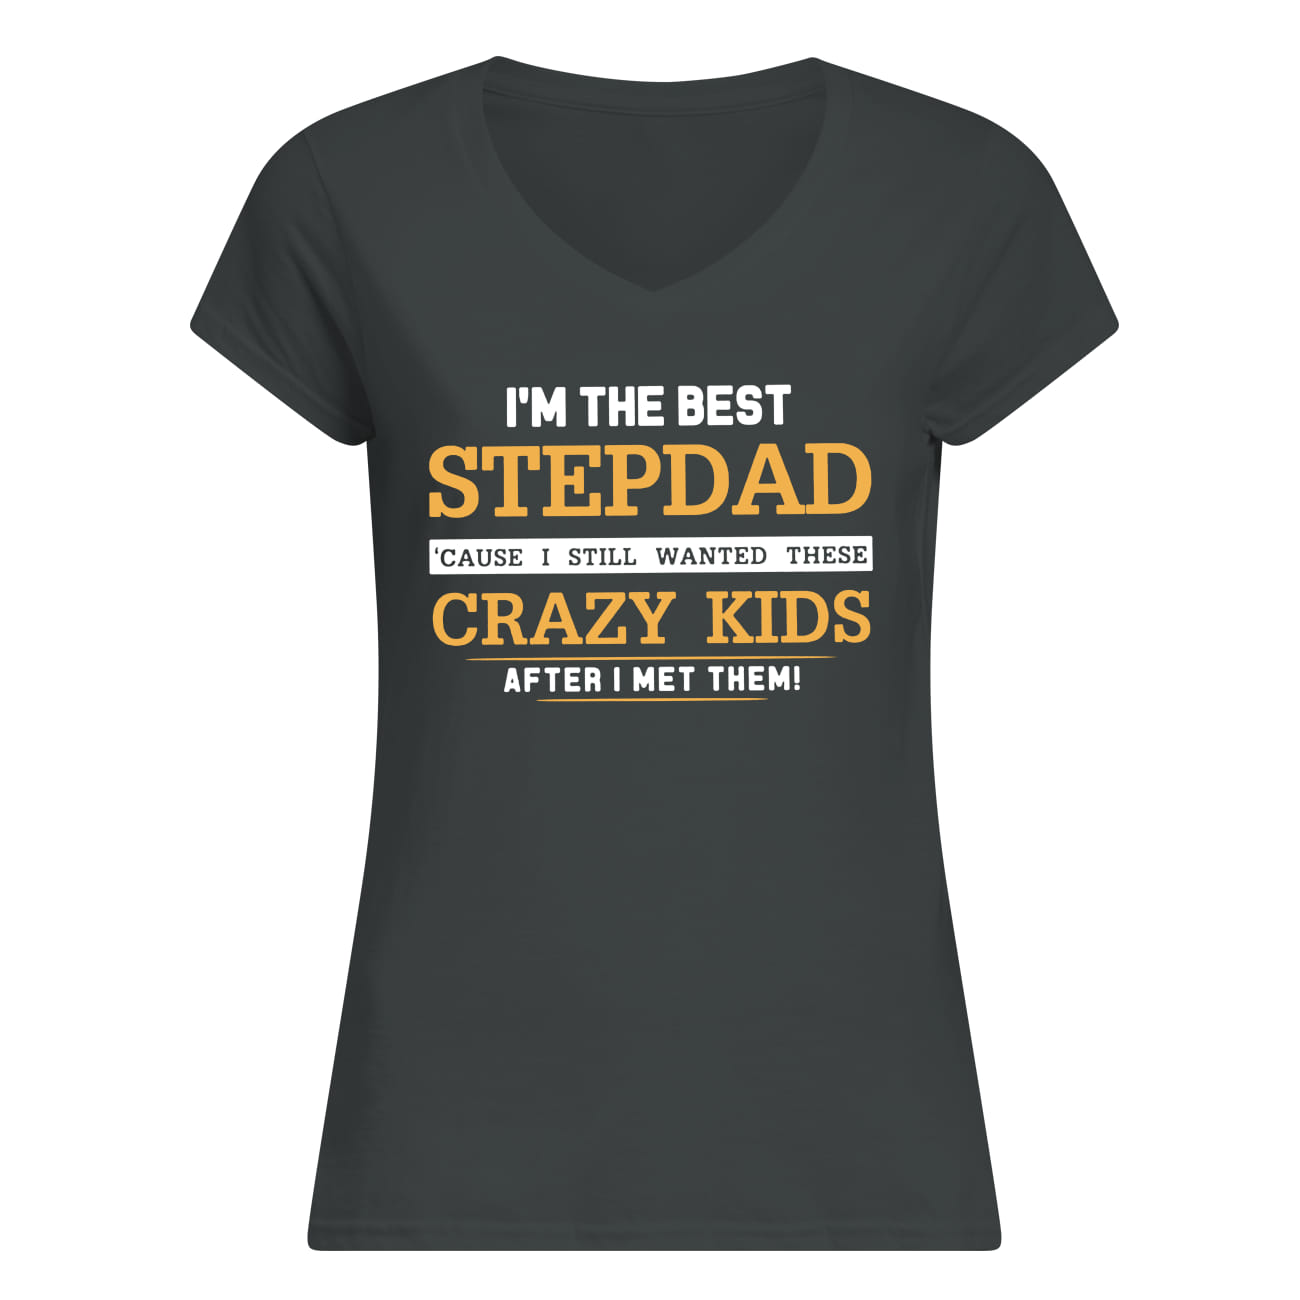 I'm the best stepdad cause I still wanted these crazy kids after I met them lady v-neck